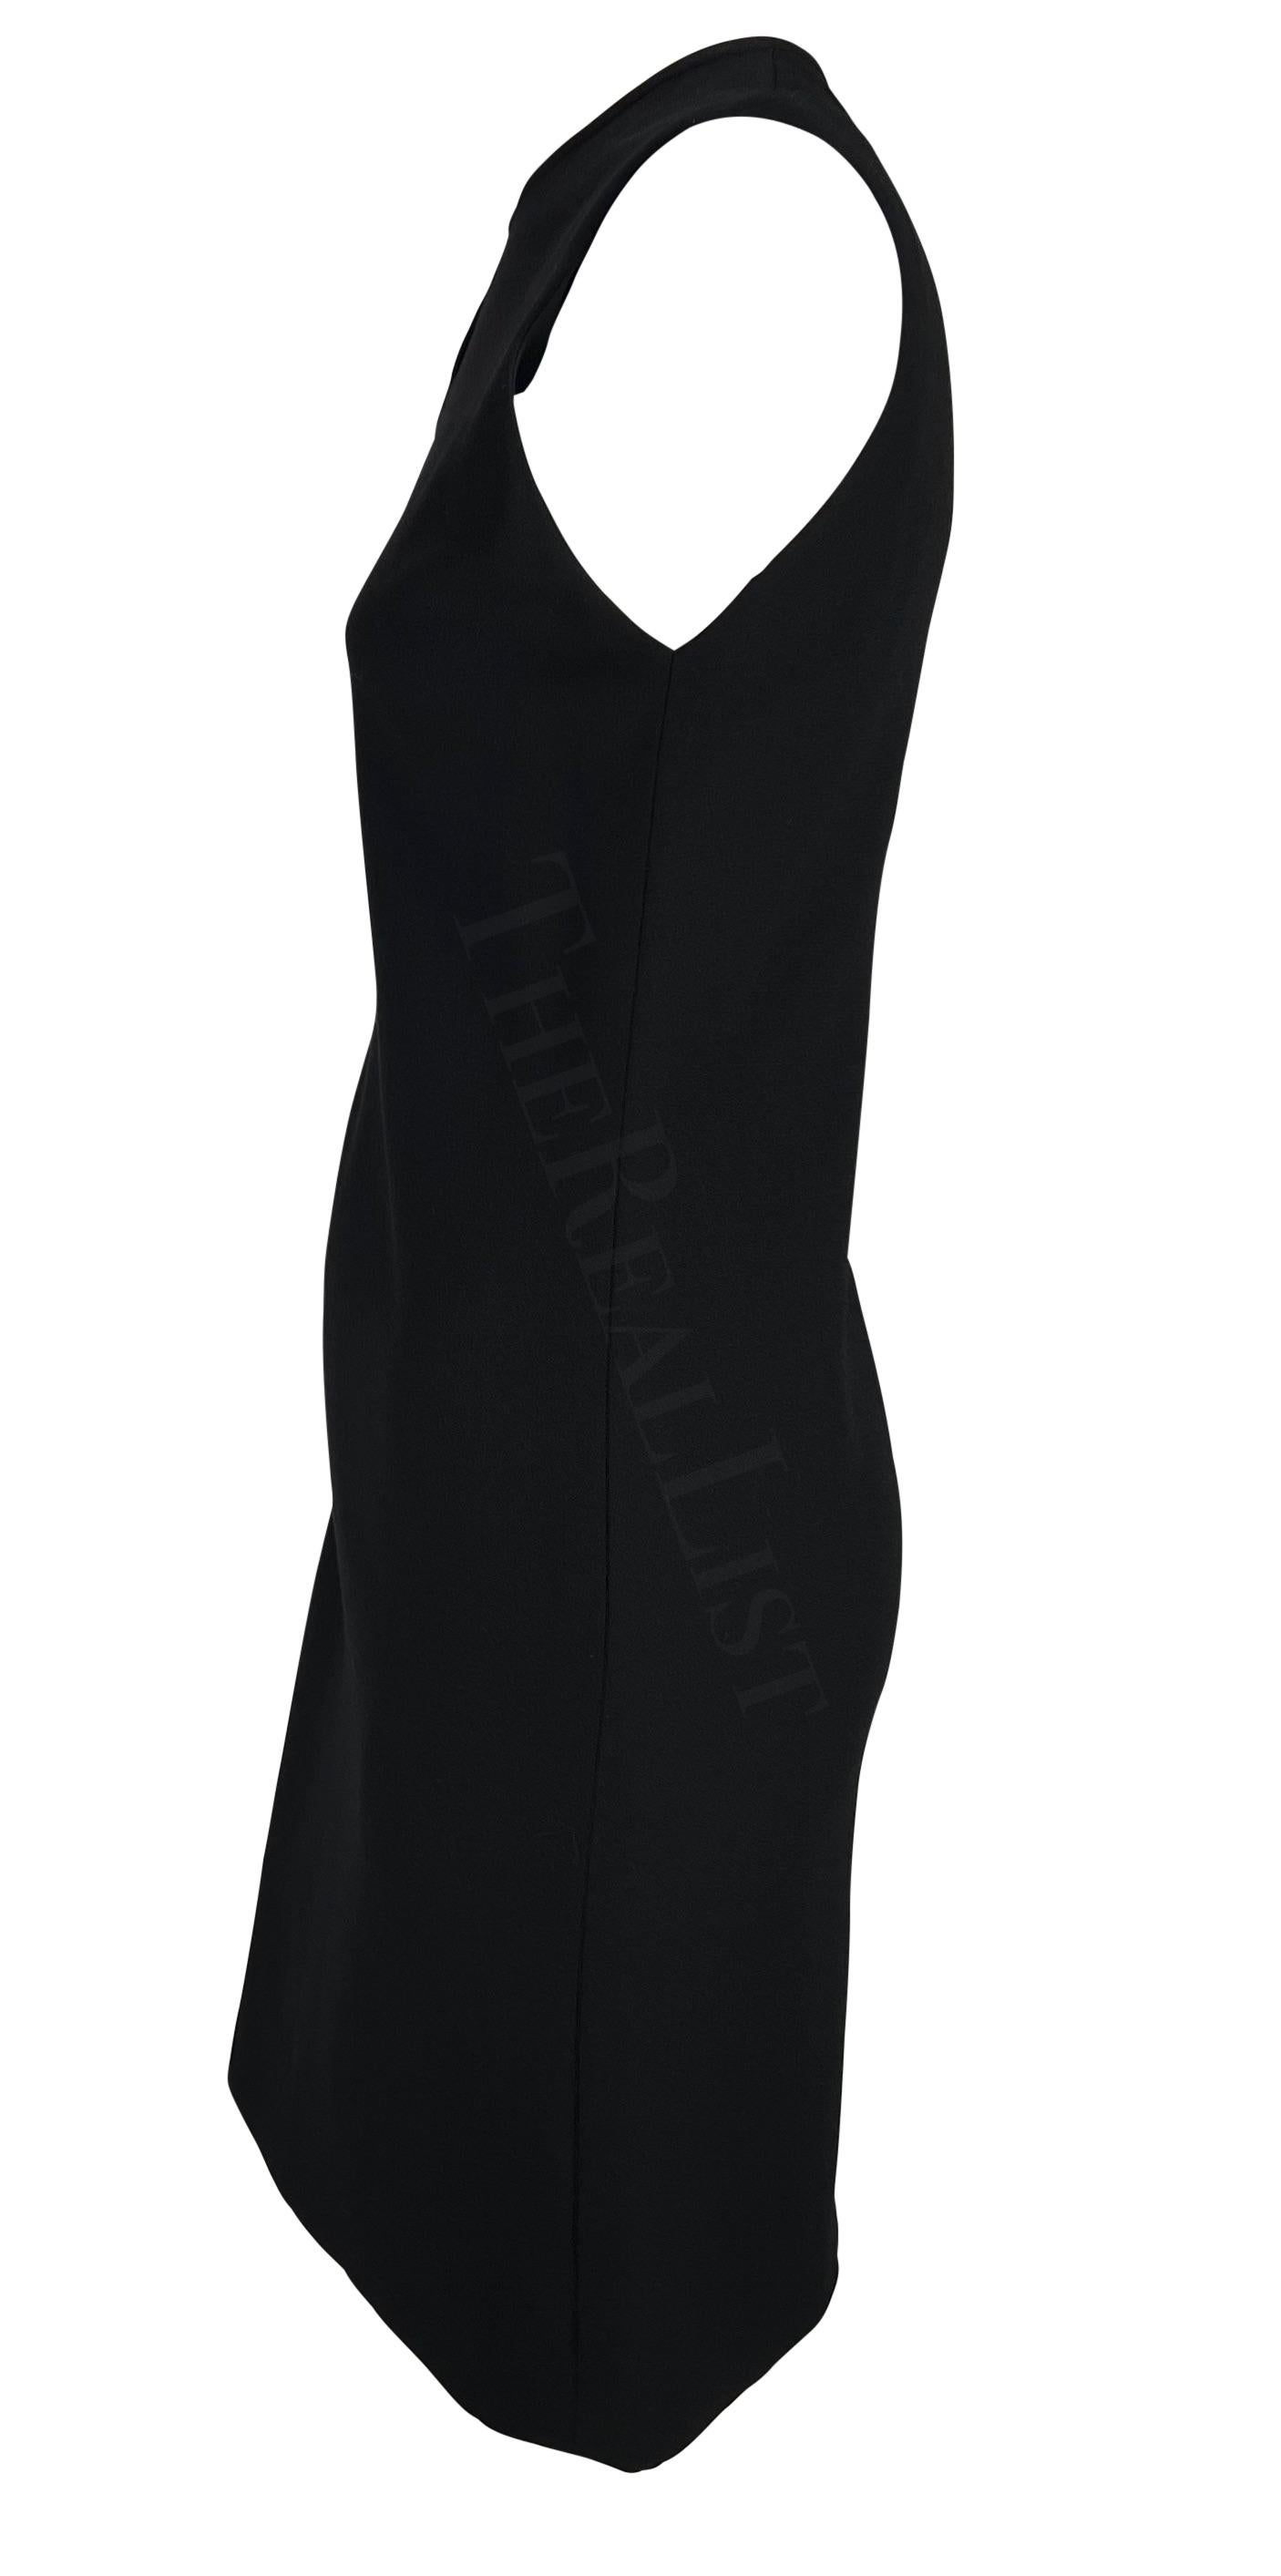 Women's NWT F/W 1997 Gianni Versace Couture Cutout Black Wool Shift Dress For Sale